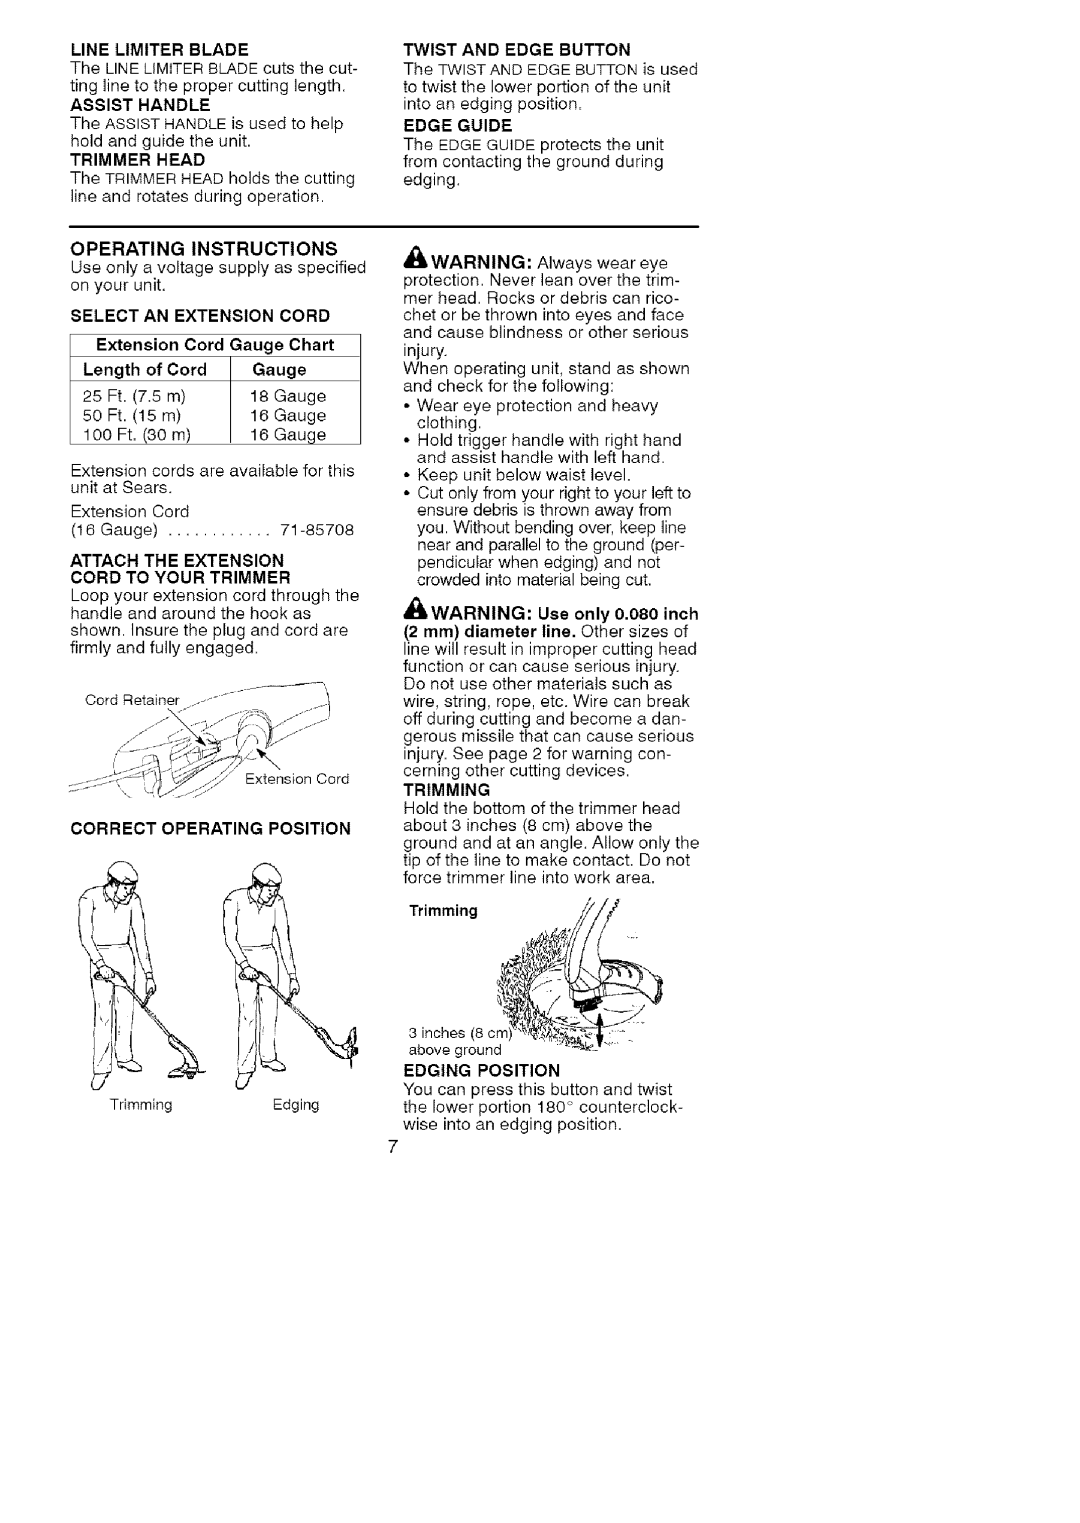 Craftsman 358.74535 Line Limiter Blade, Assist Handle, Trimmer Head, Operating Instructions, Select AN Extension Cord 